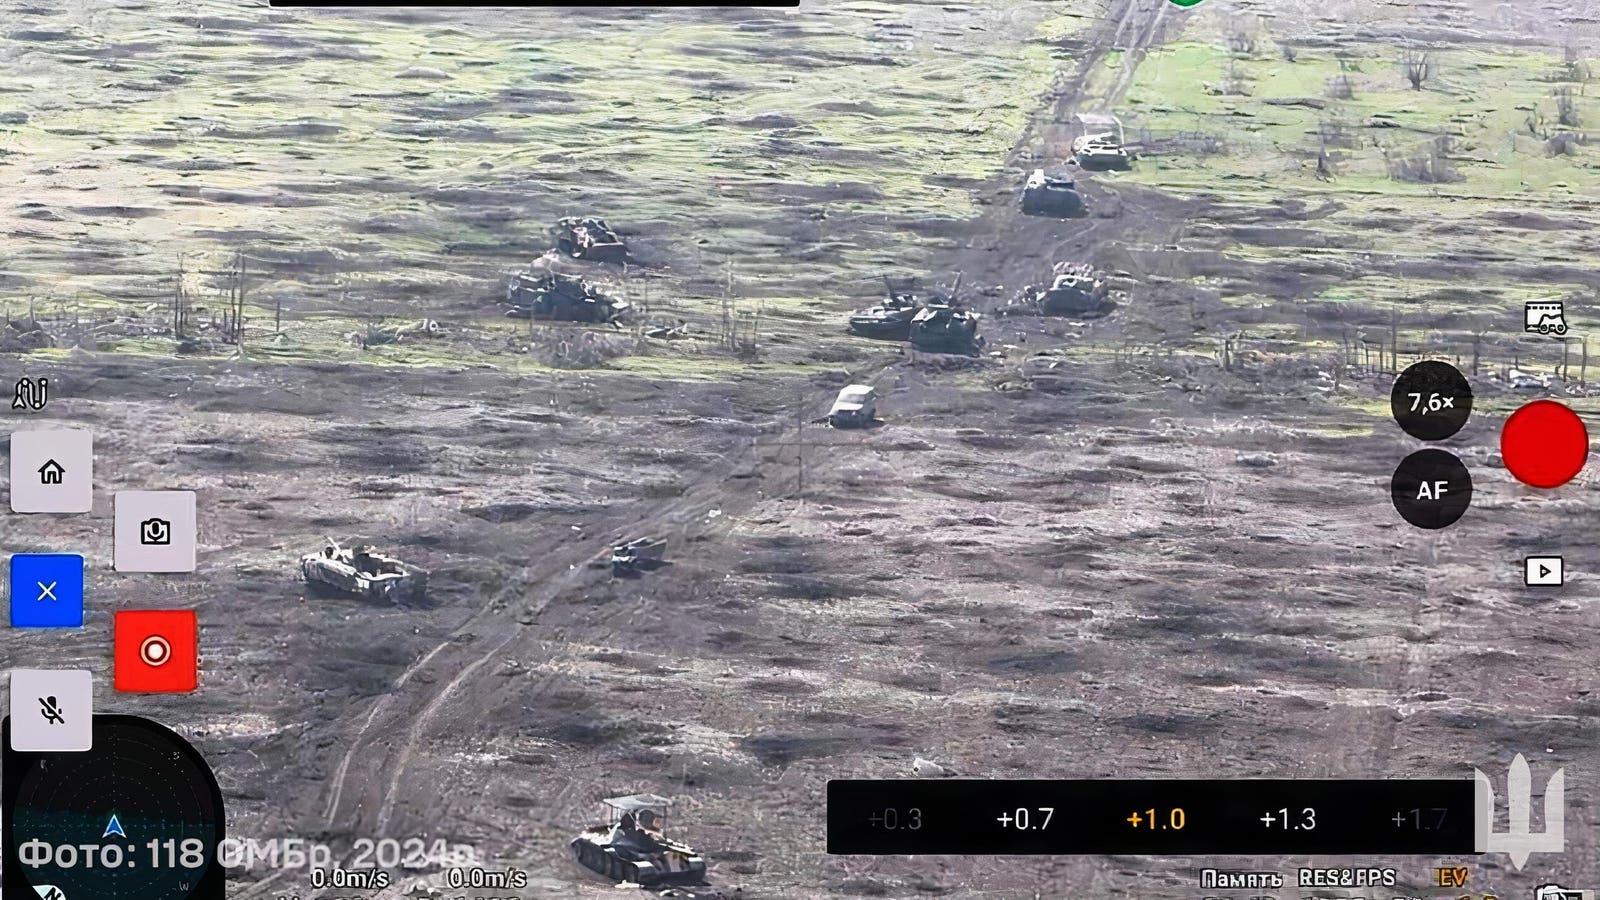 Is An Elite Russian Division Soundless Elite If It Has 70-twelve months-Old Tanks?